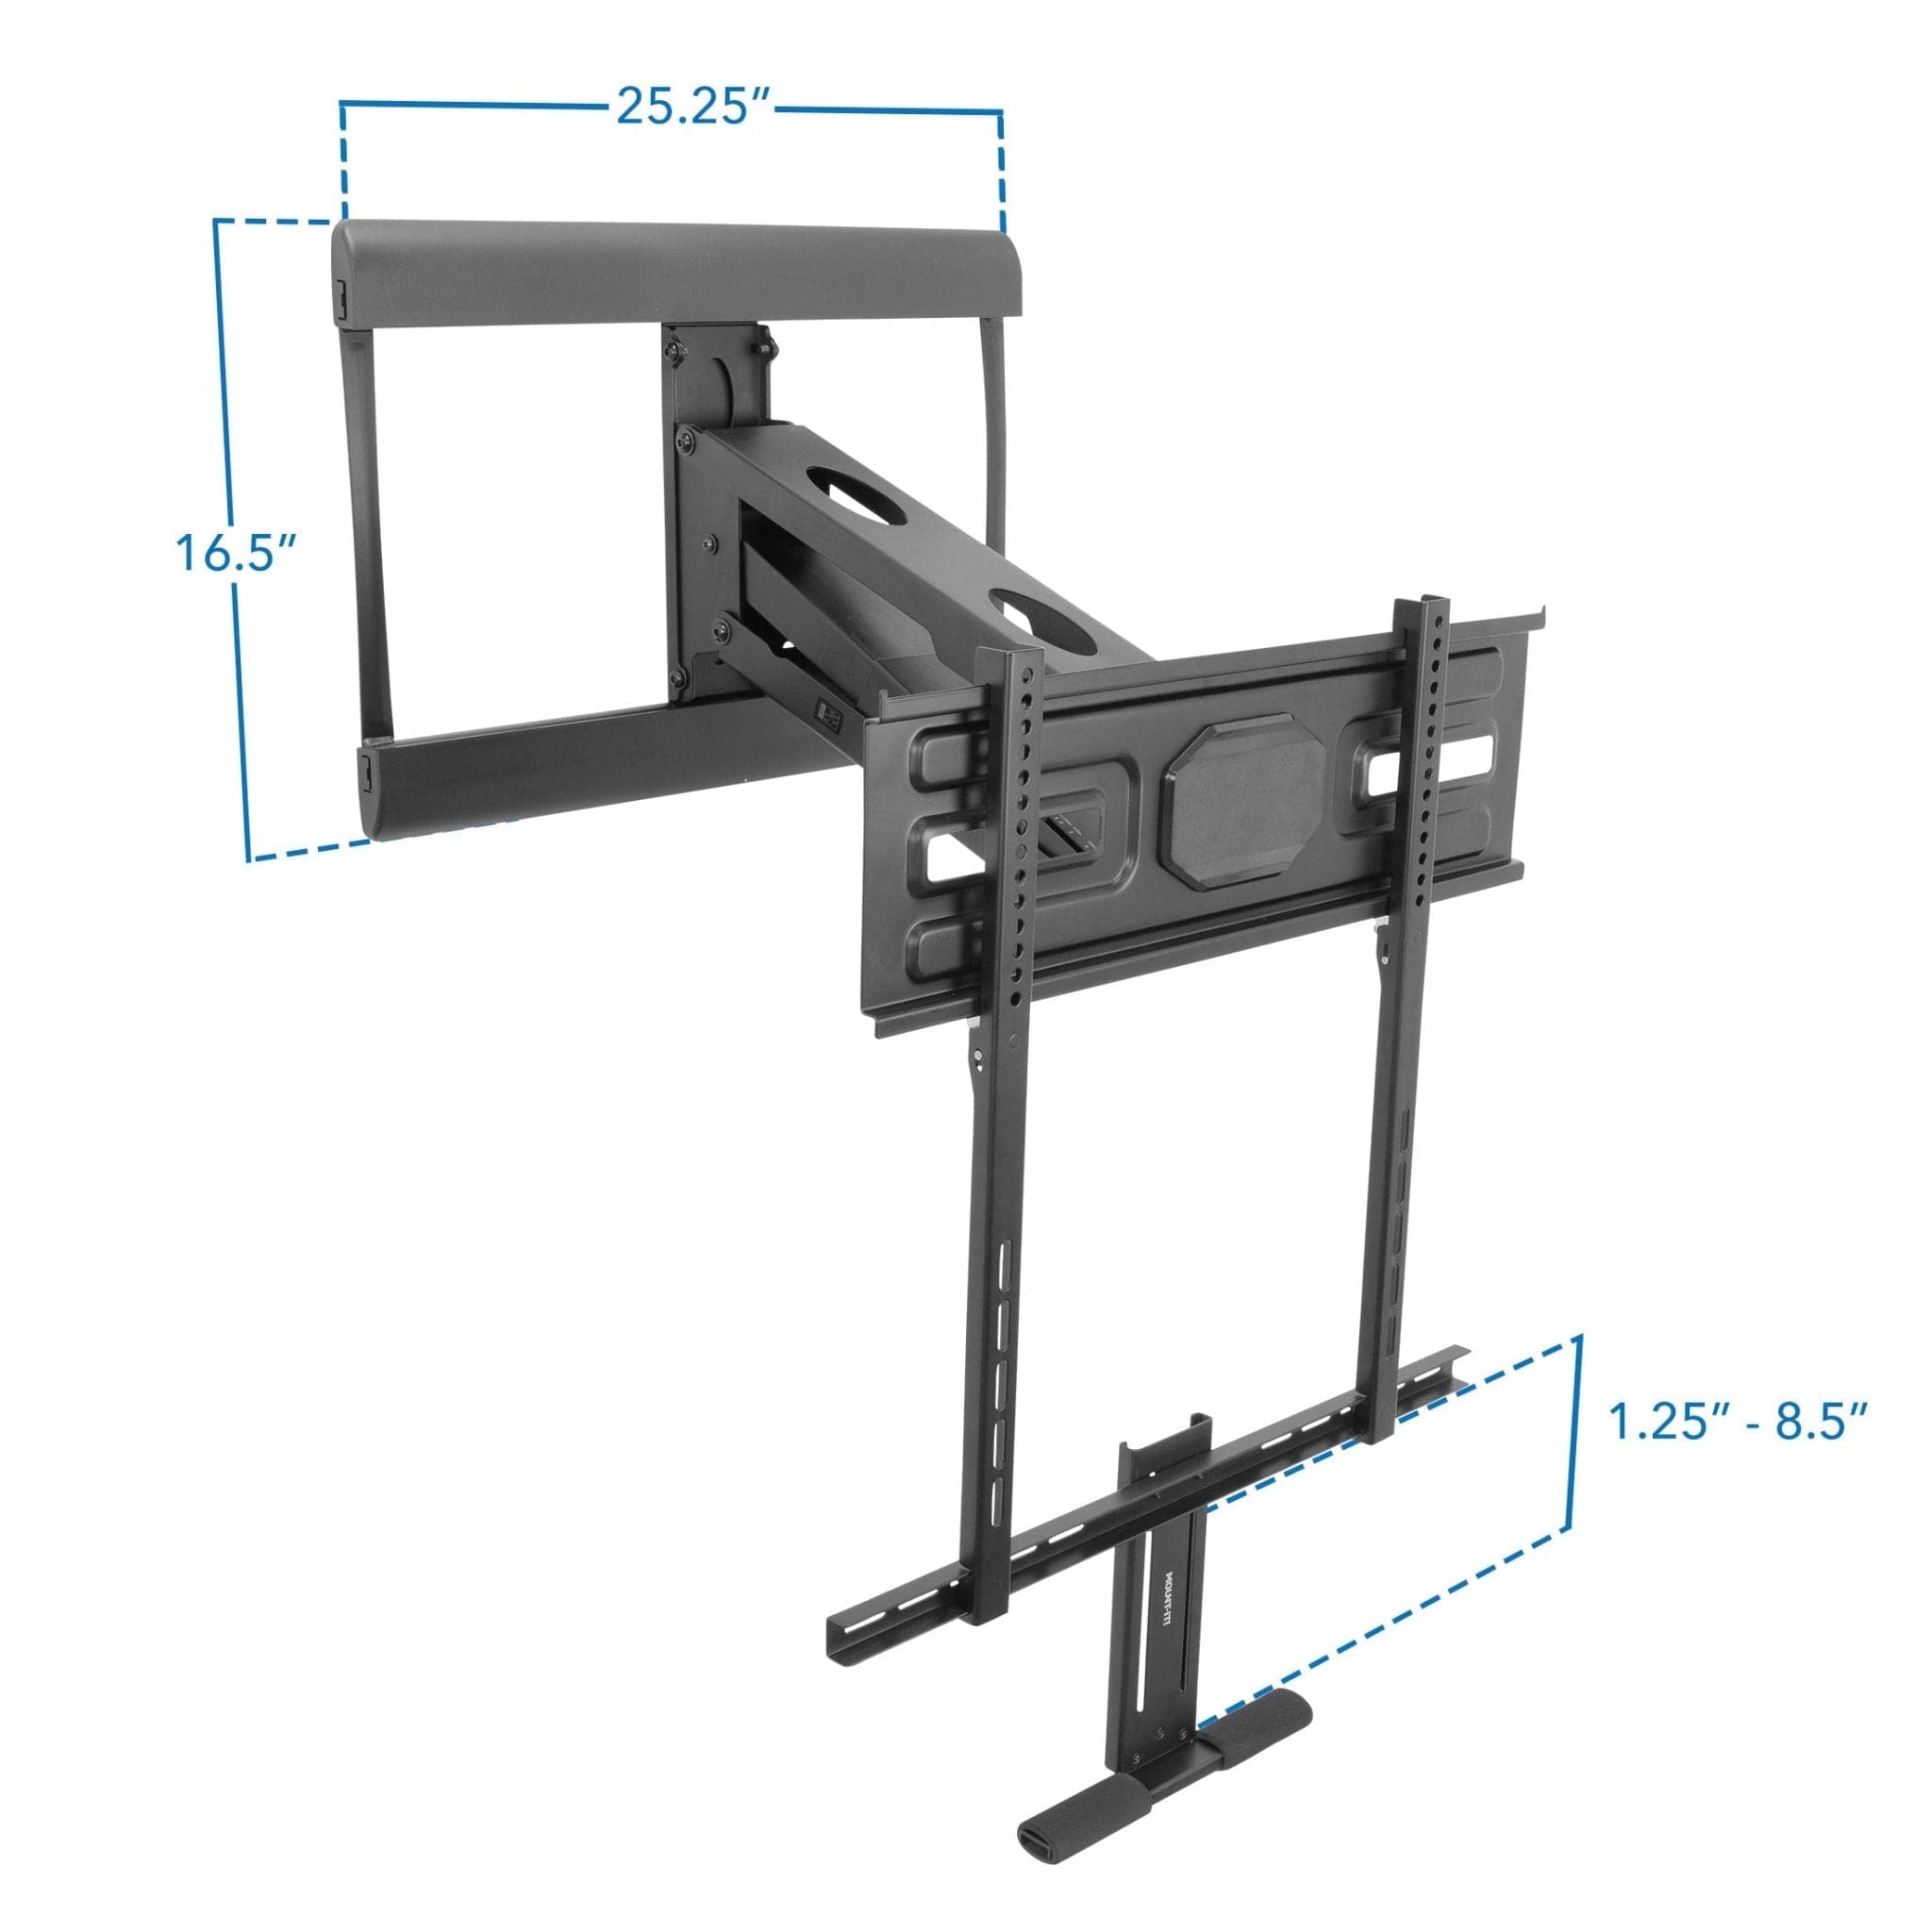 Height Adjustable Fireplace TV Mount with Gas Spring Arm - Mount-It!